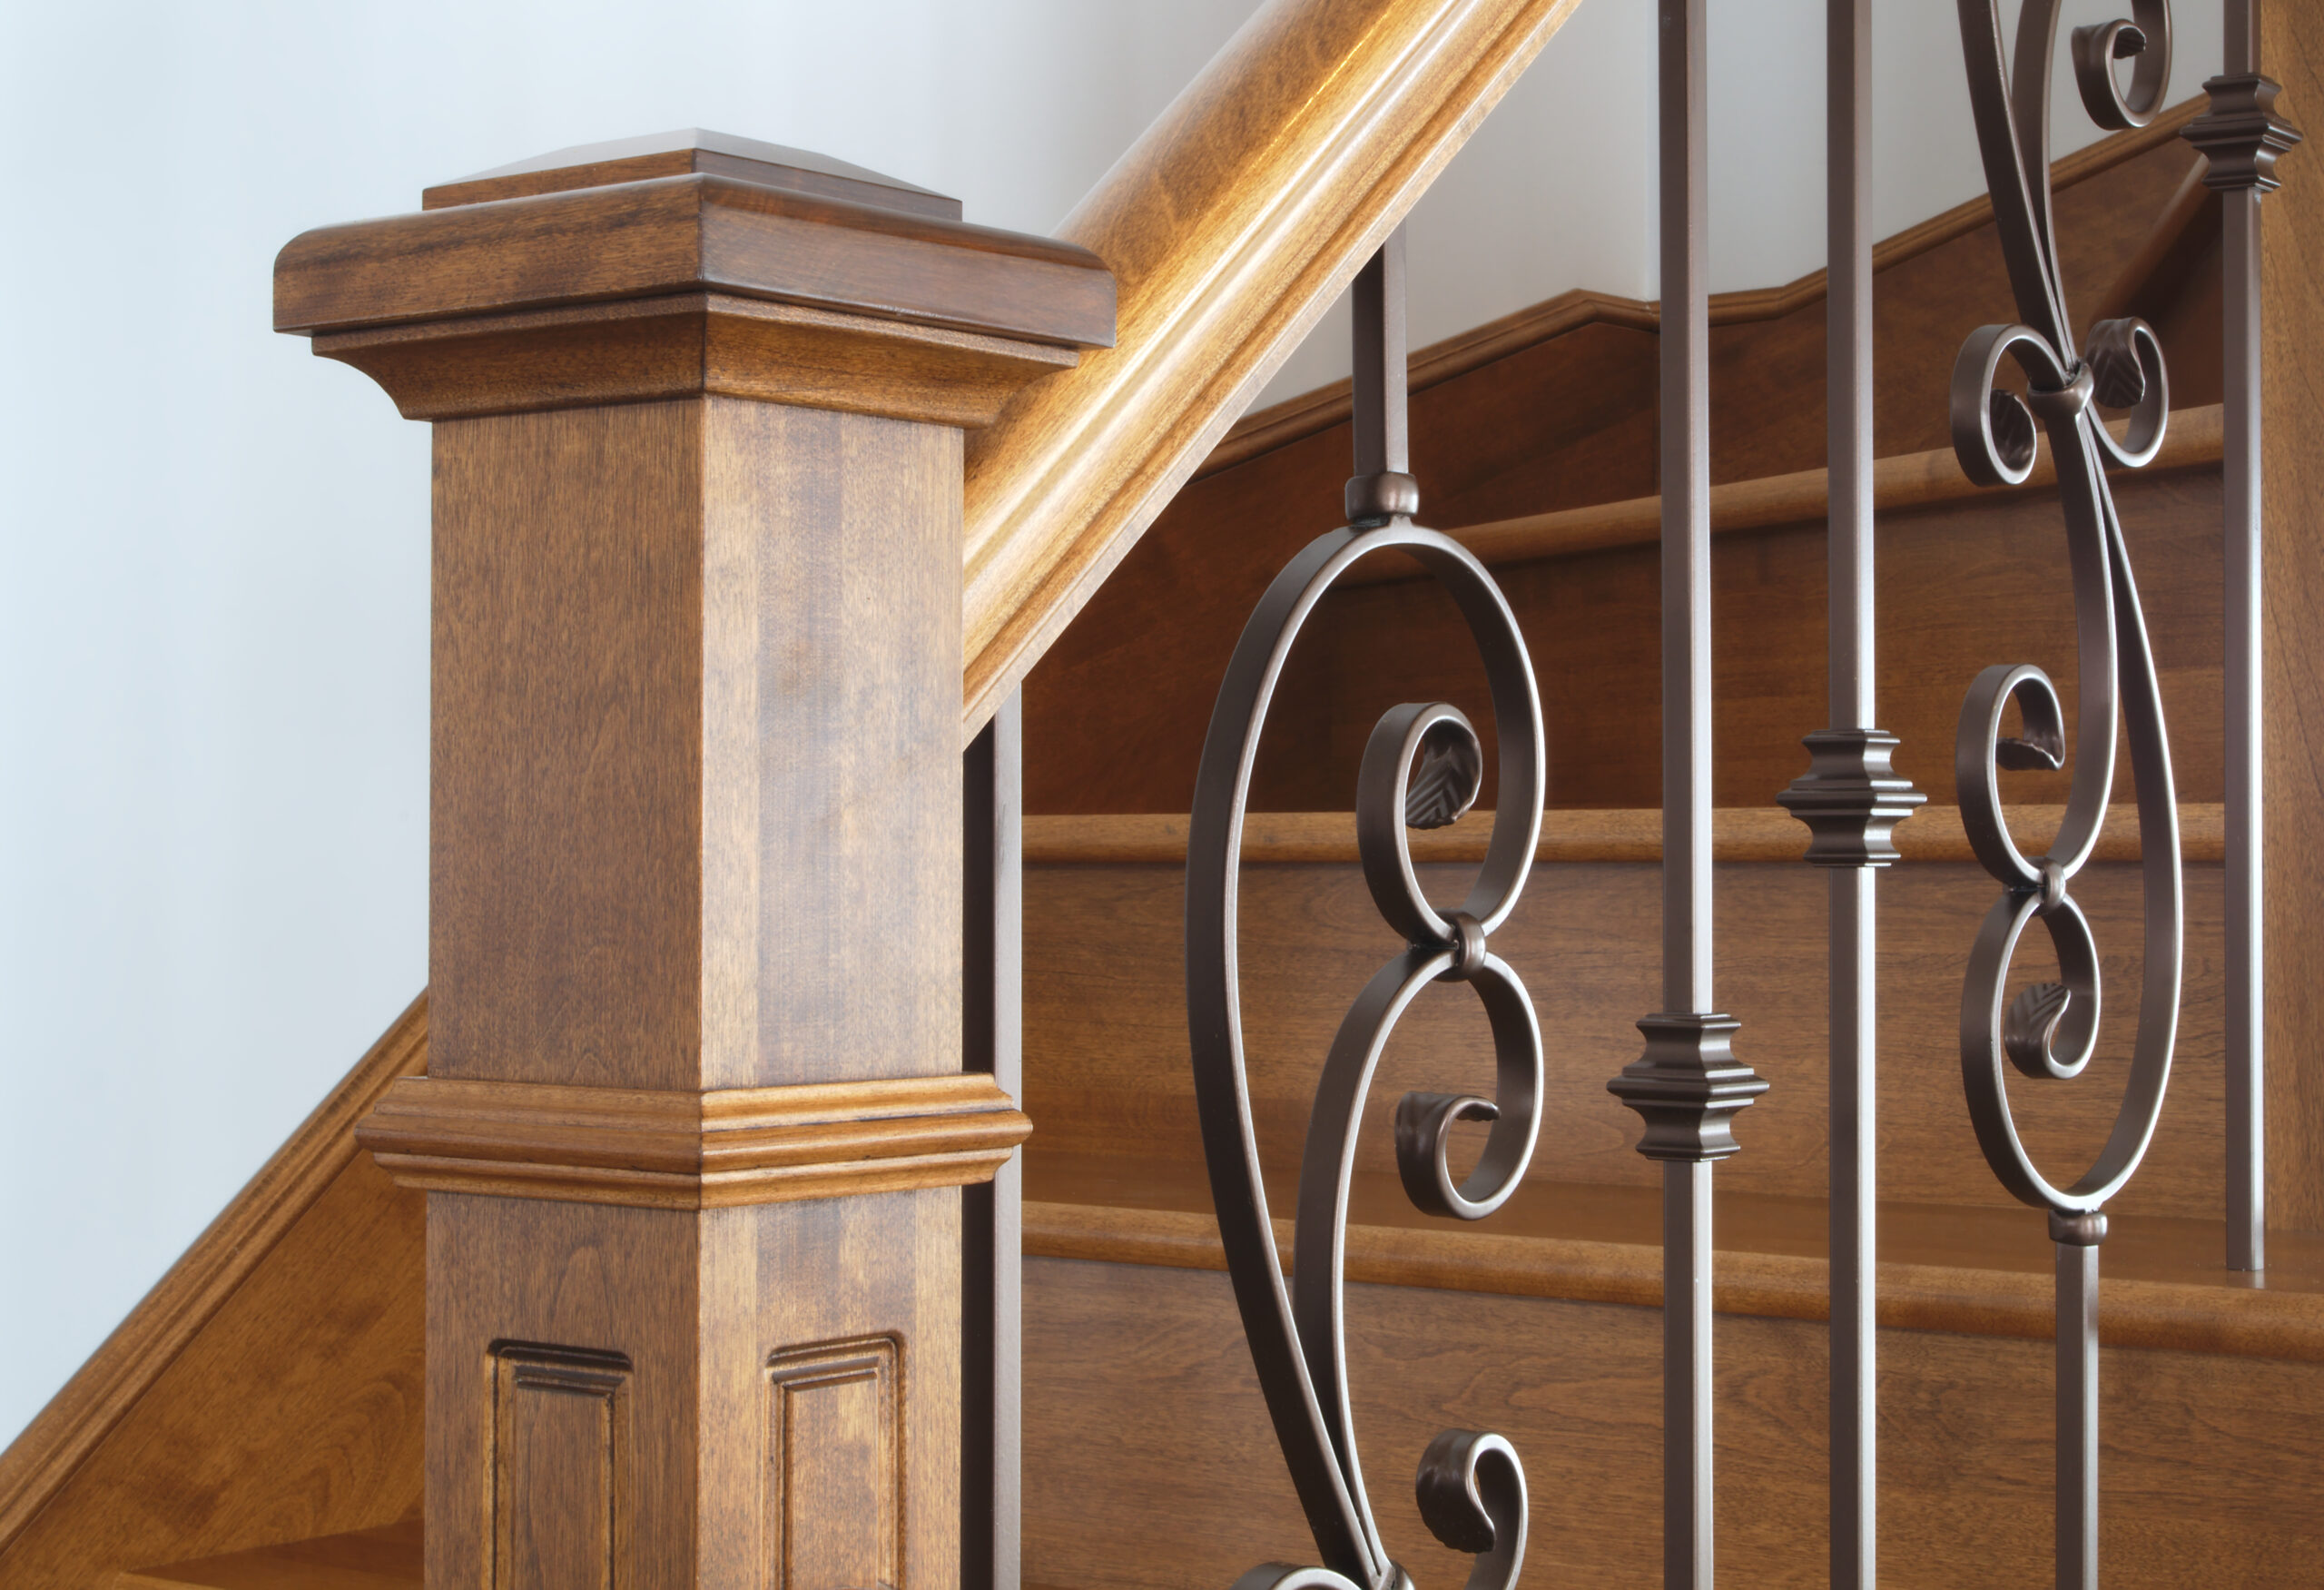 Quality Stair Parts: Choosing Wisely When it Comes to Stair Construction